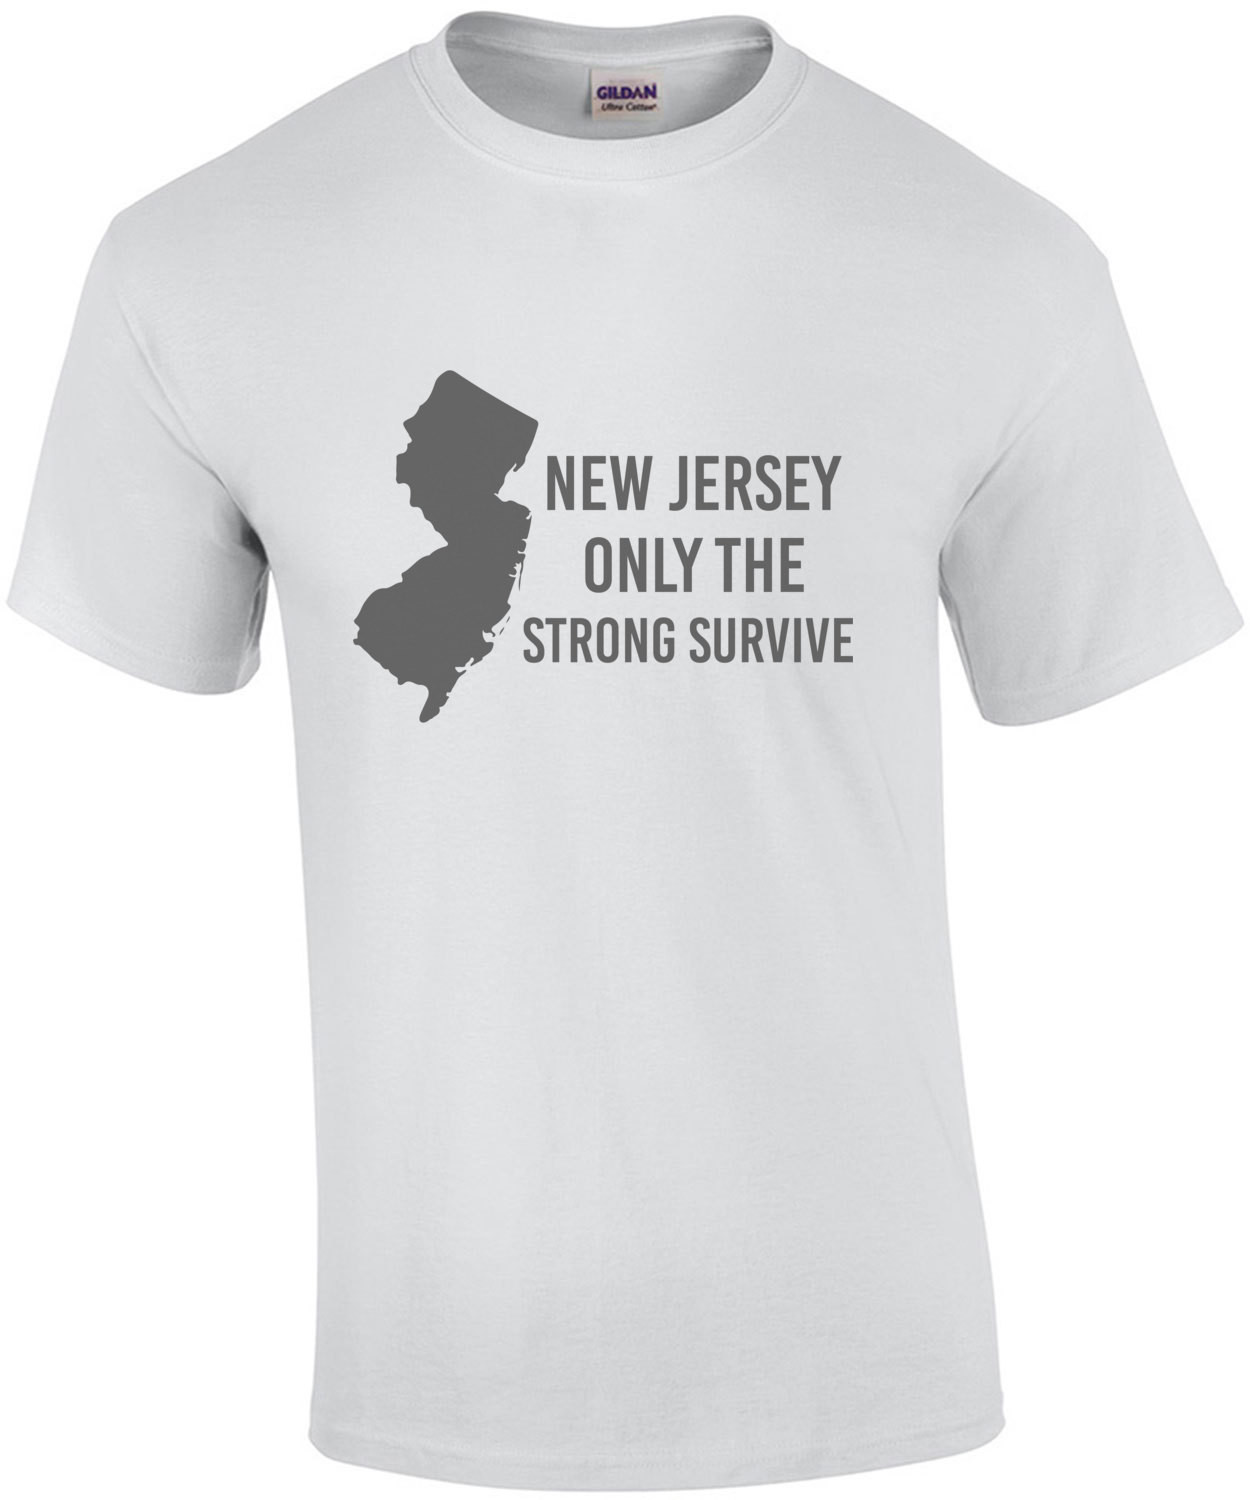 New Jersey only the strong survive - New Jersey T-shirt